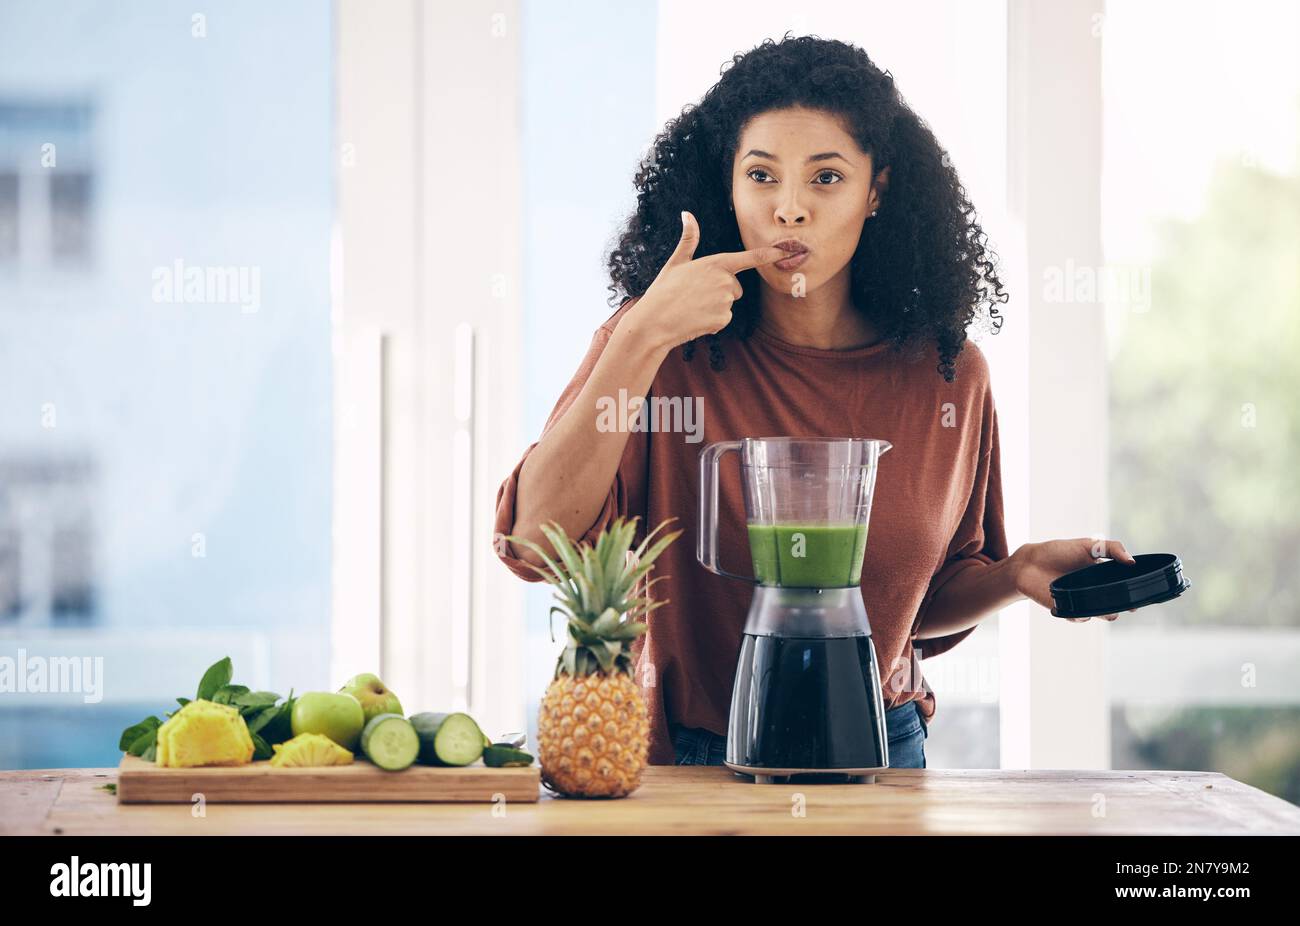 https://c8.alamy.com/comp/2N7Y9M2/blender-smoothie-and-healthy-black-woman-taste-juice-for-green-diet-detox-and-breakfast-fruits-in-kitchen-vegetables-food-and-person-or-2N7Y9M2.jpg